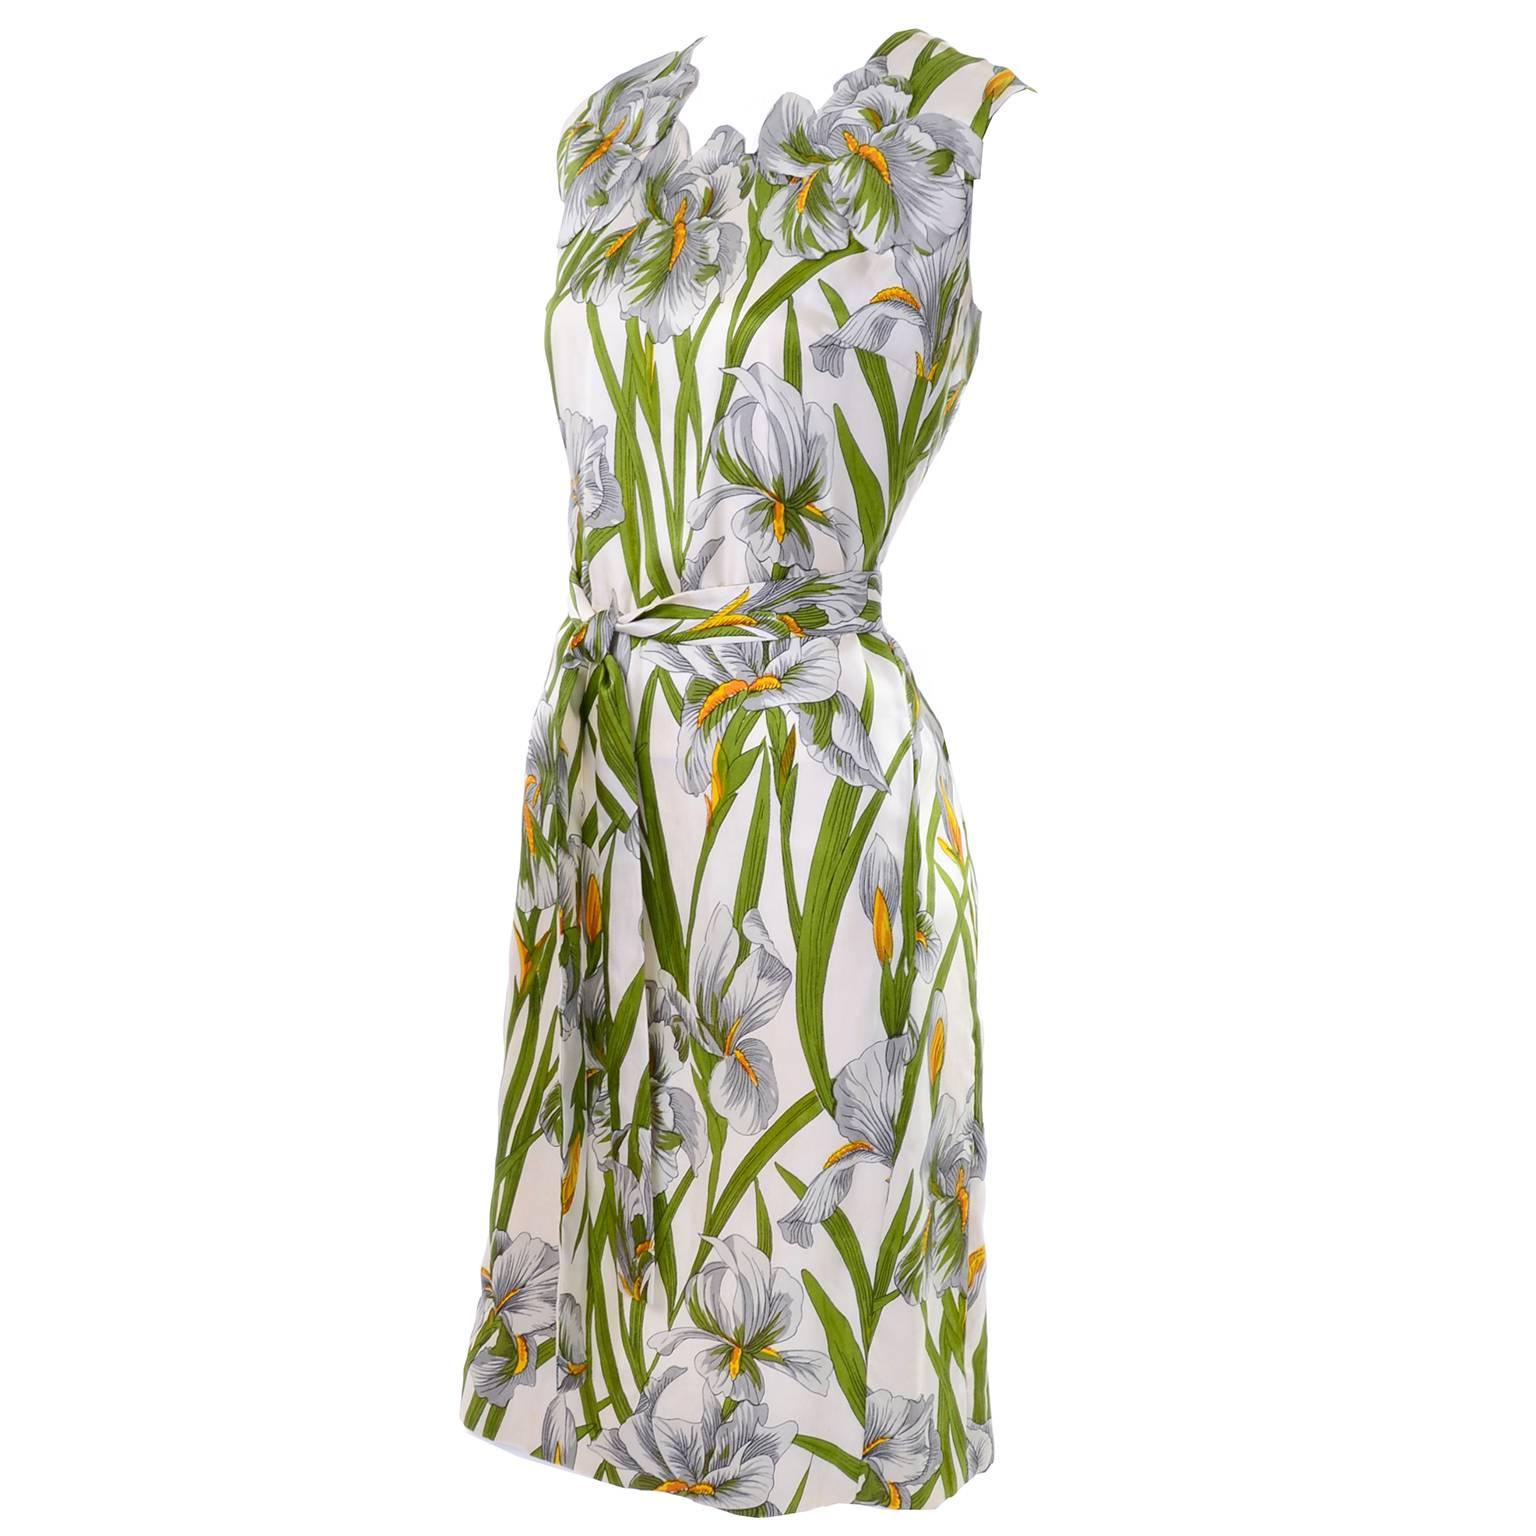 Vintage Silk Donald Brooks Dress With Spring White Iris Flowers and Green Leaves